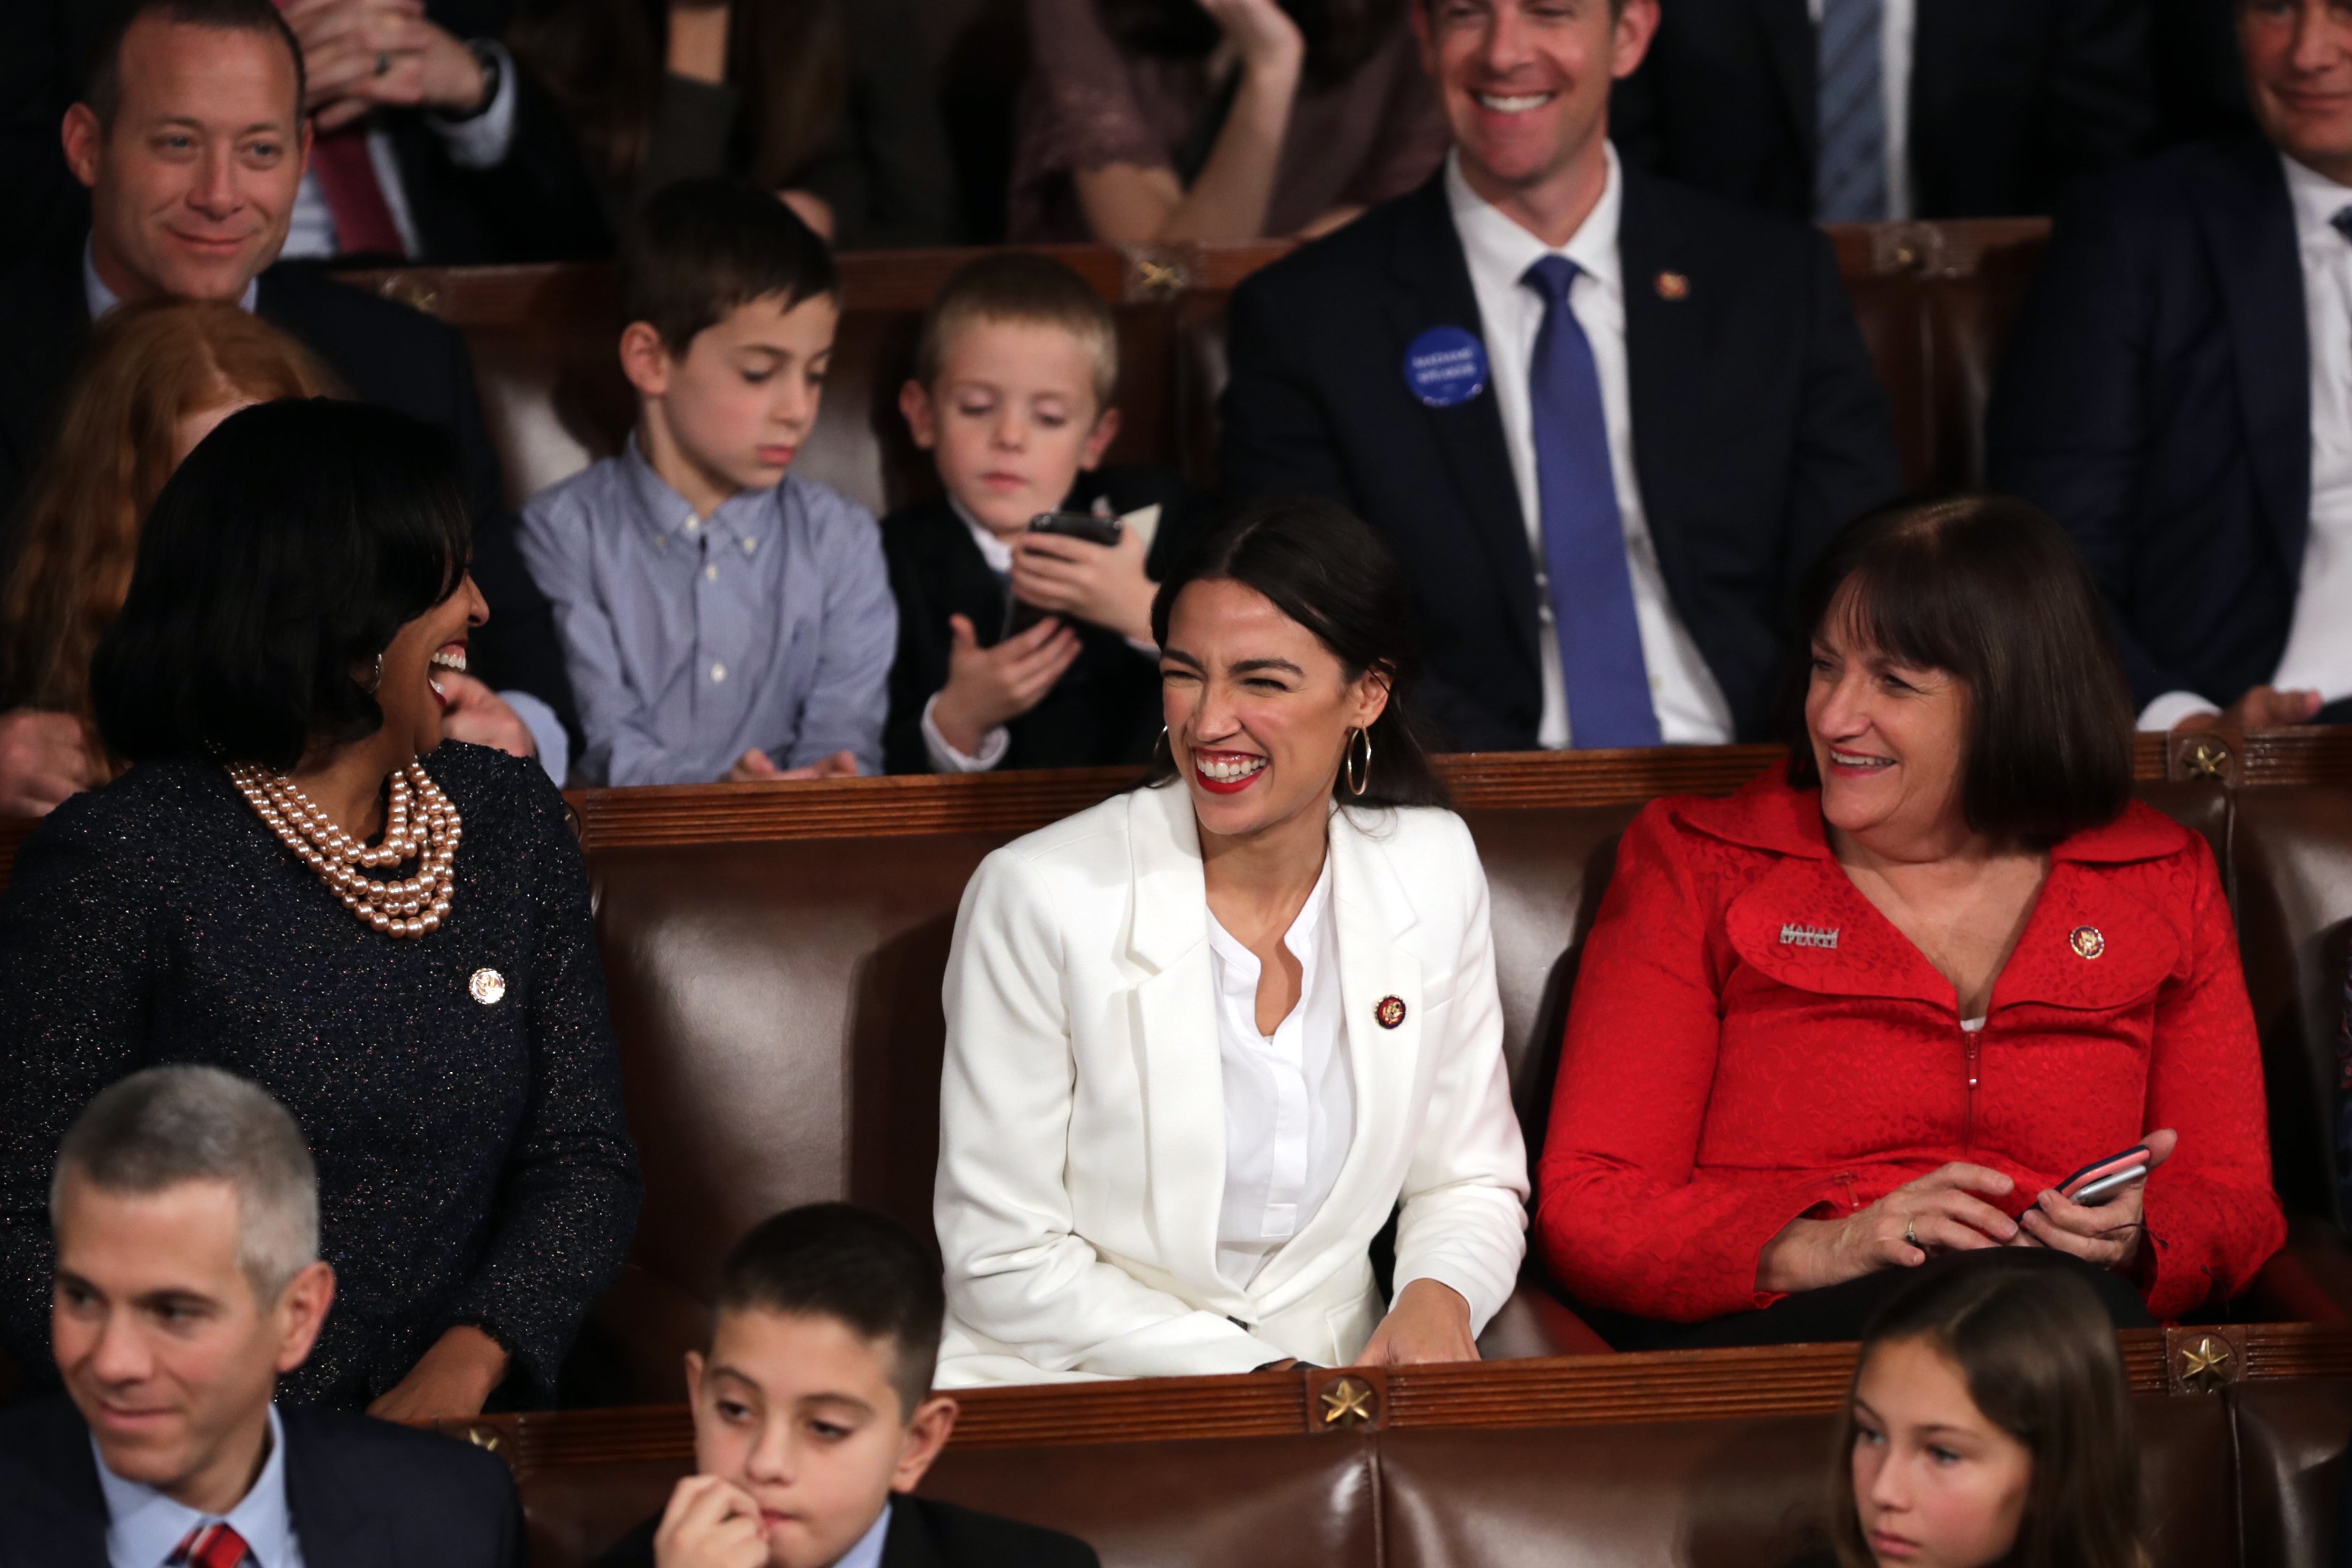 Alexandria Ocasio-Cortez among other congresswomen at Capitol Hill on January 2019 | Photo: Getty Images